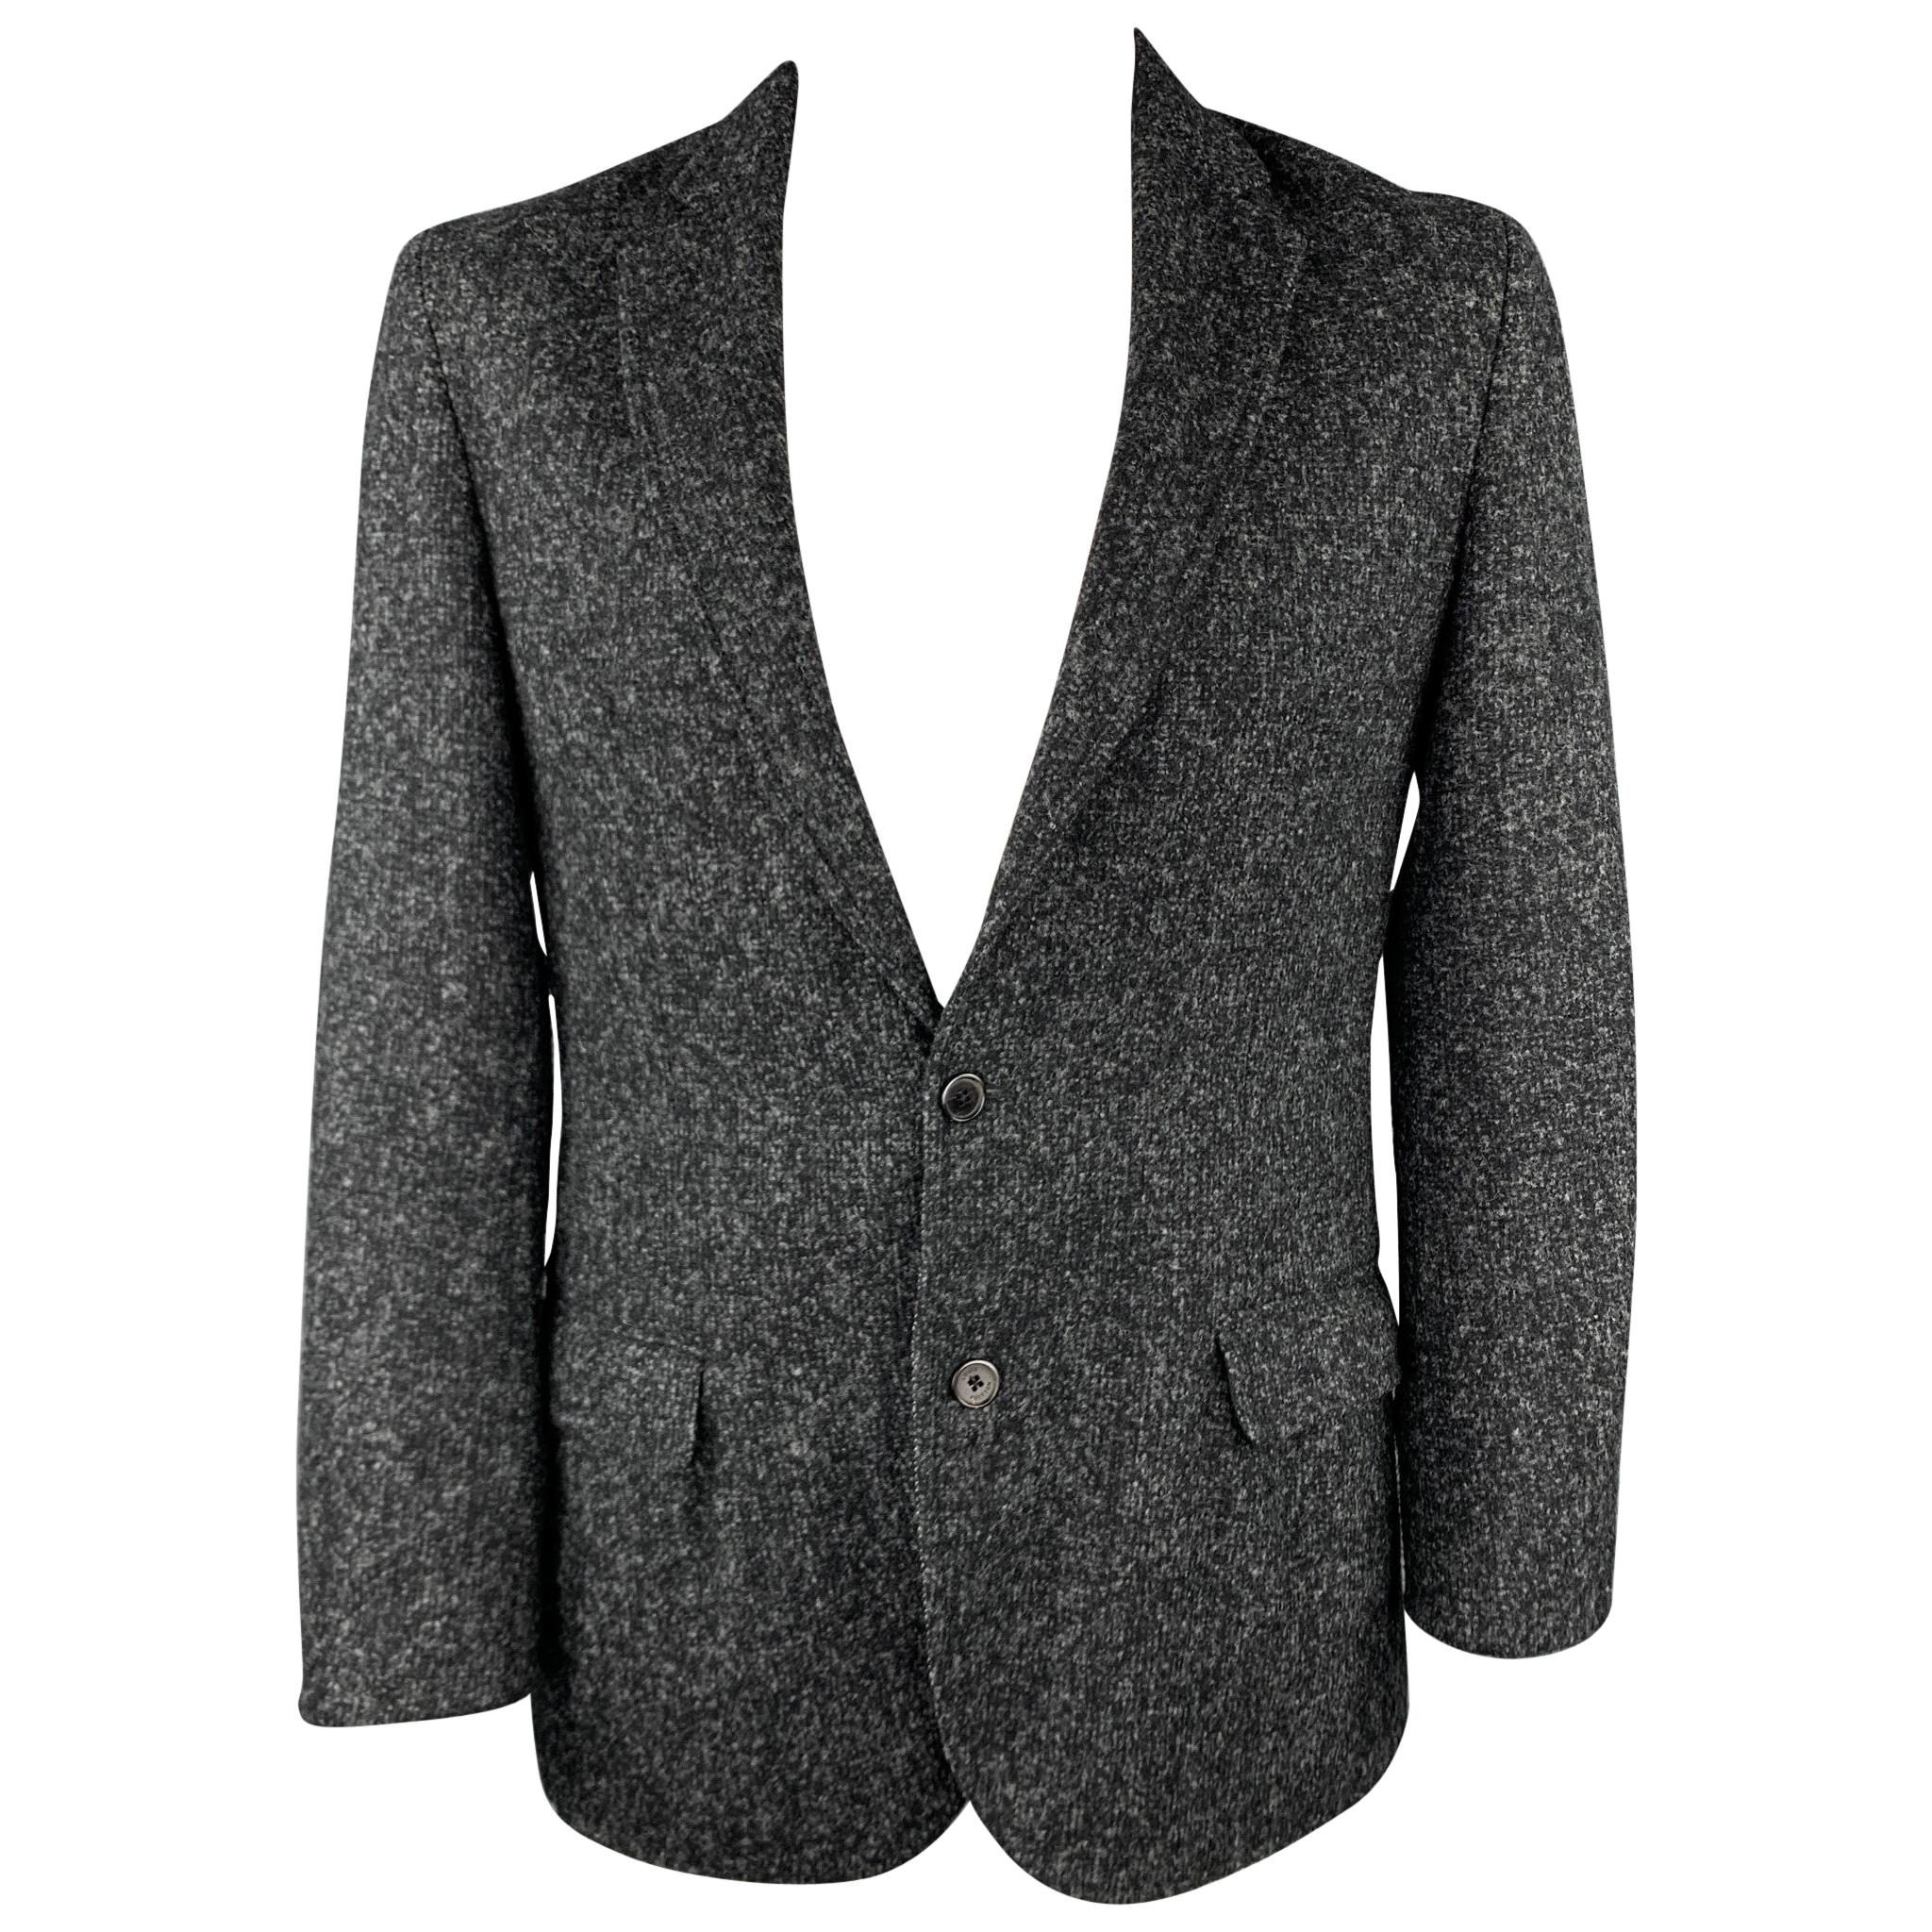 Louis Vuitton Black and White Tweed Jacket With Dramatic Collar - 21st ...